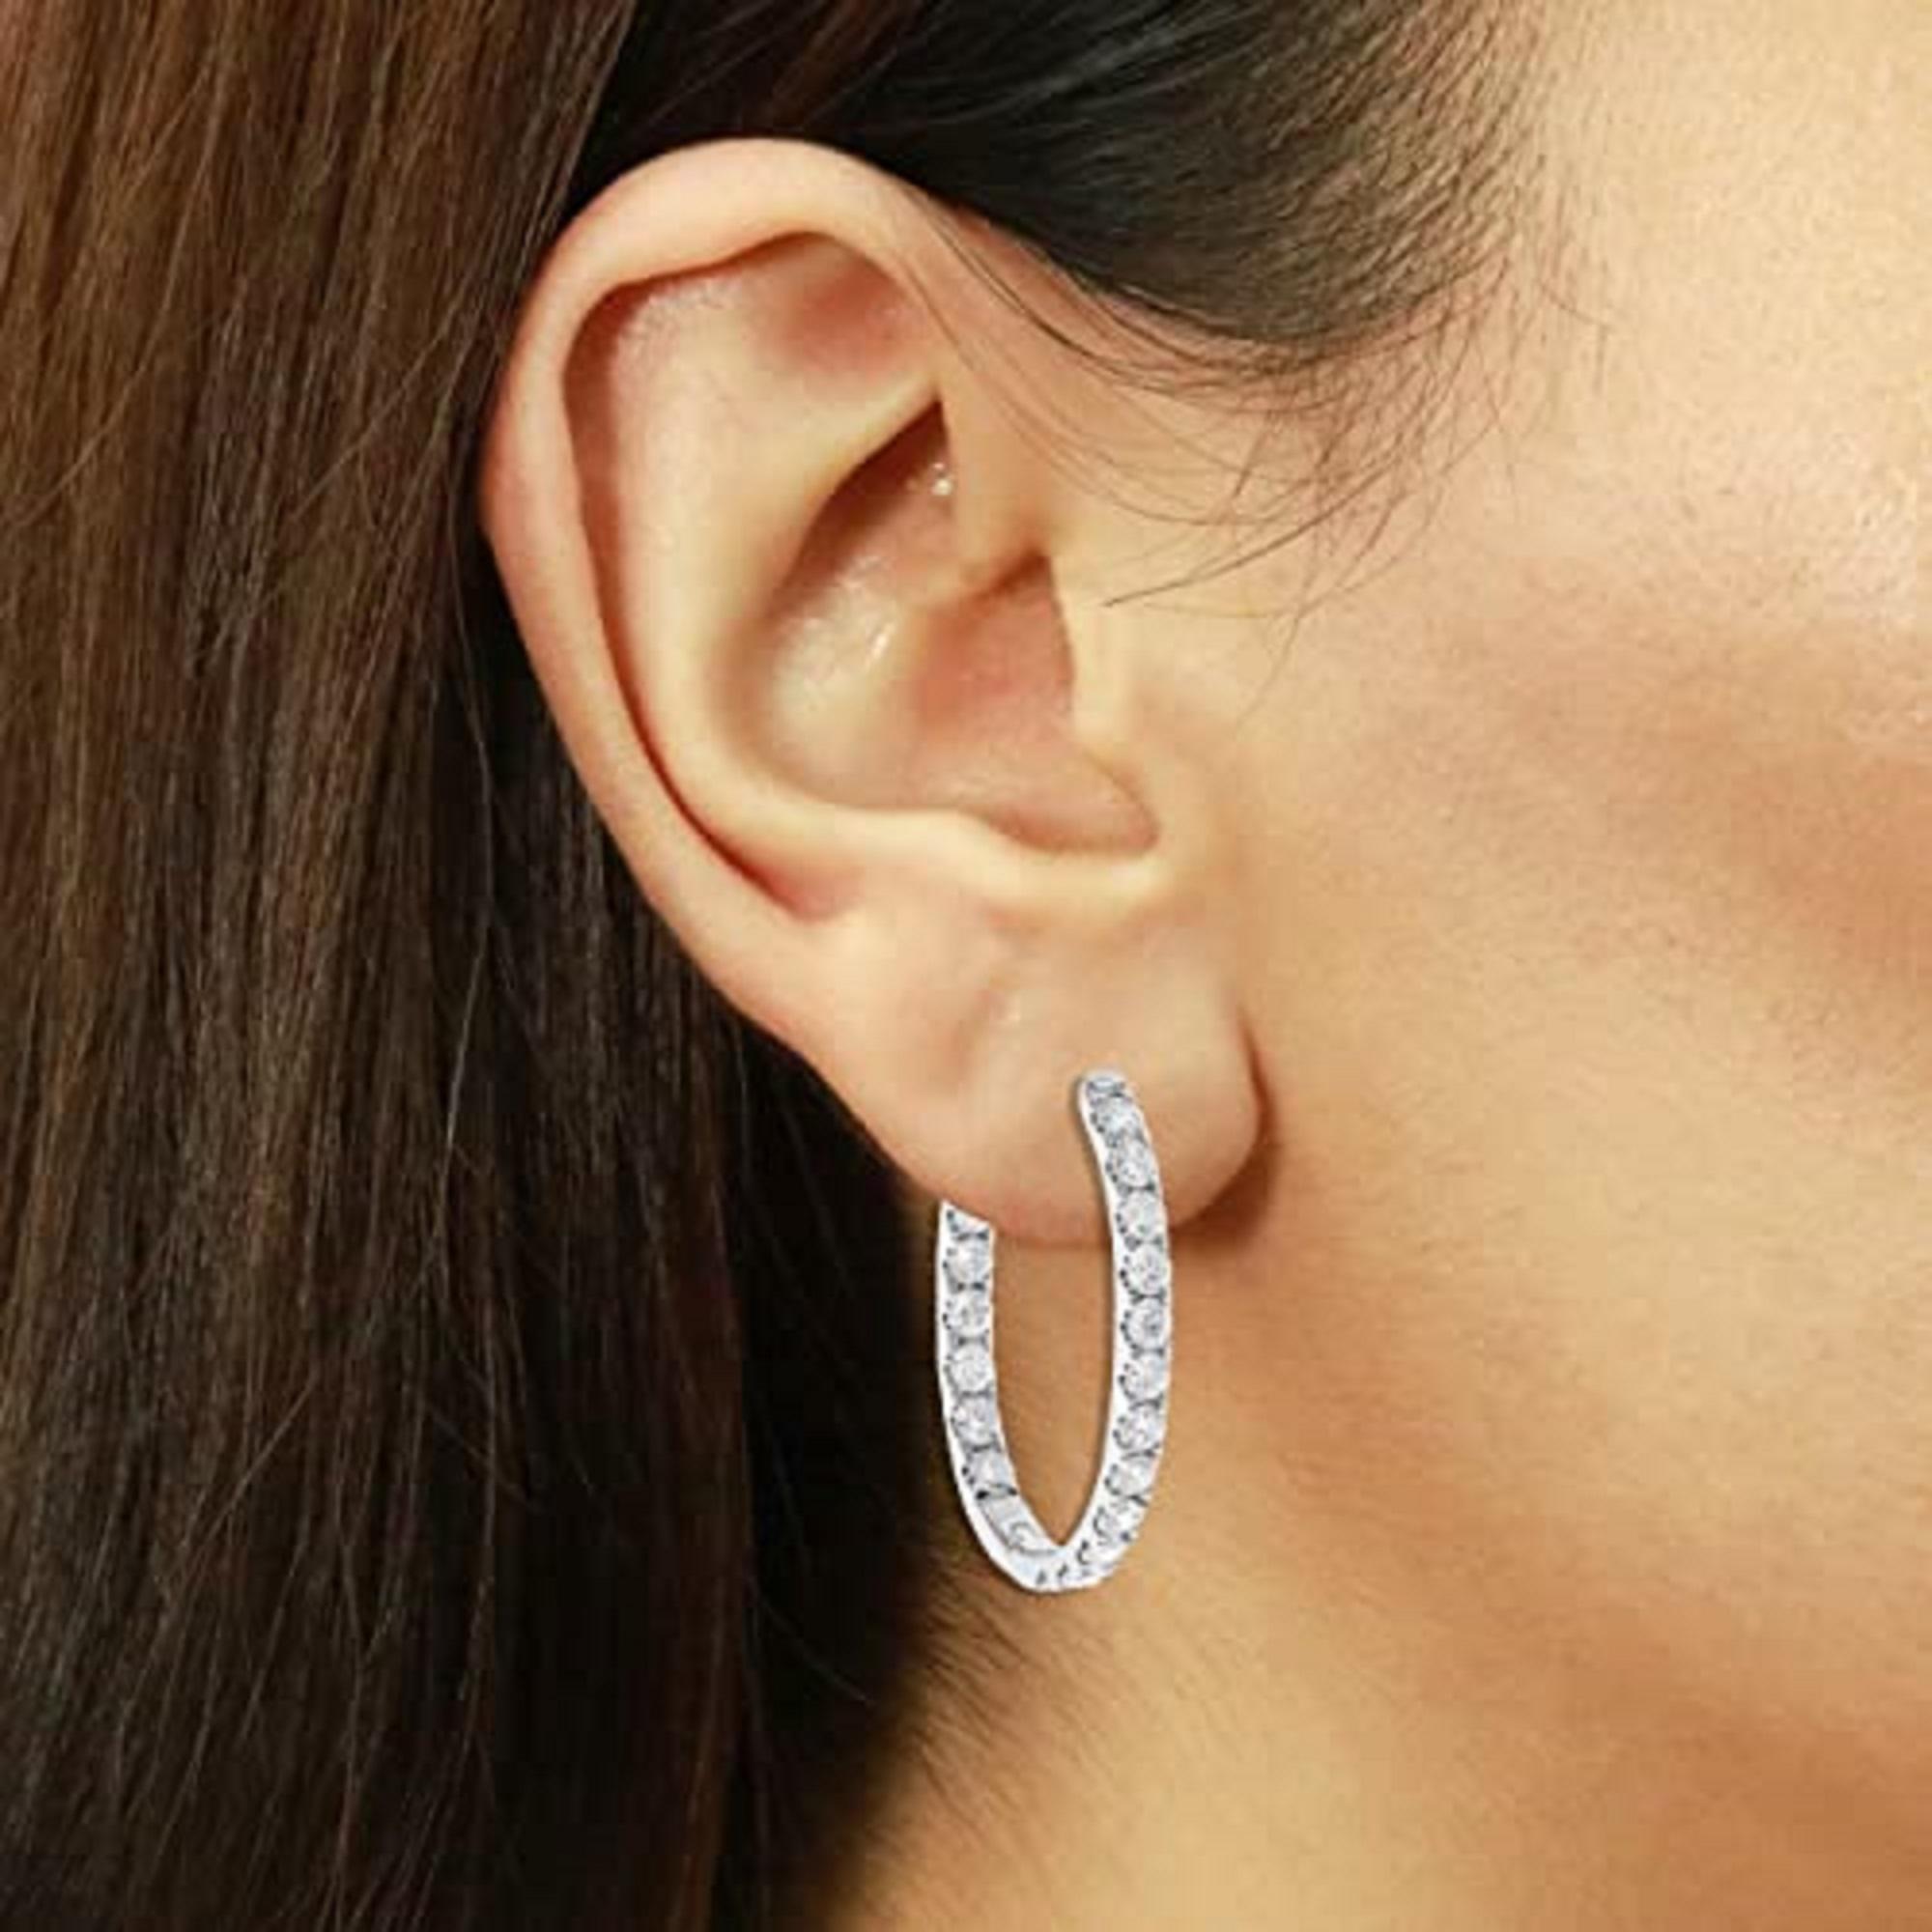 Decorate yourself in elegance with this Earring is crafted from 14-karat White Gold by Gin & Grace. This Earring is made up of Round-cut White Diamond (38 Pcs) 1.548 Carat. This Earring is weight 4.520 grams. This delicate Earring is polished to a